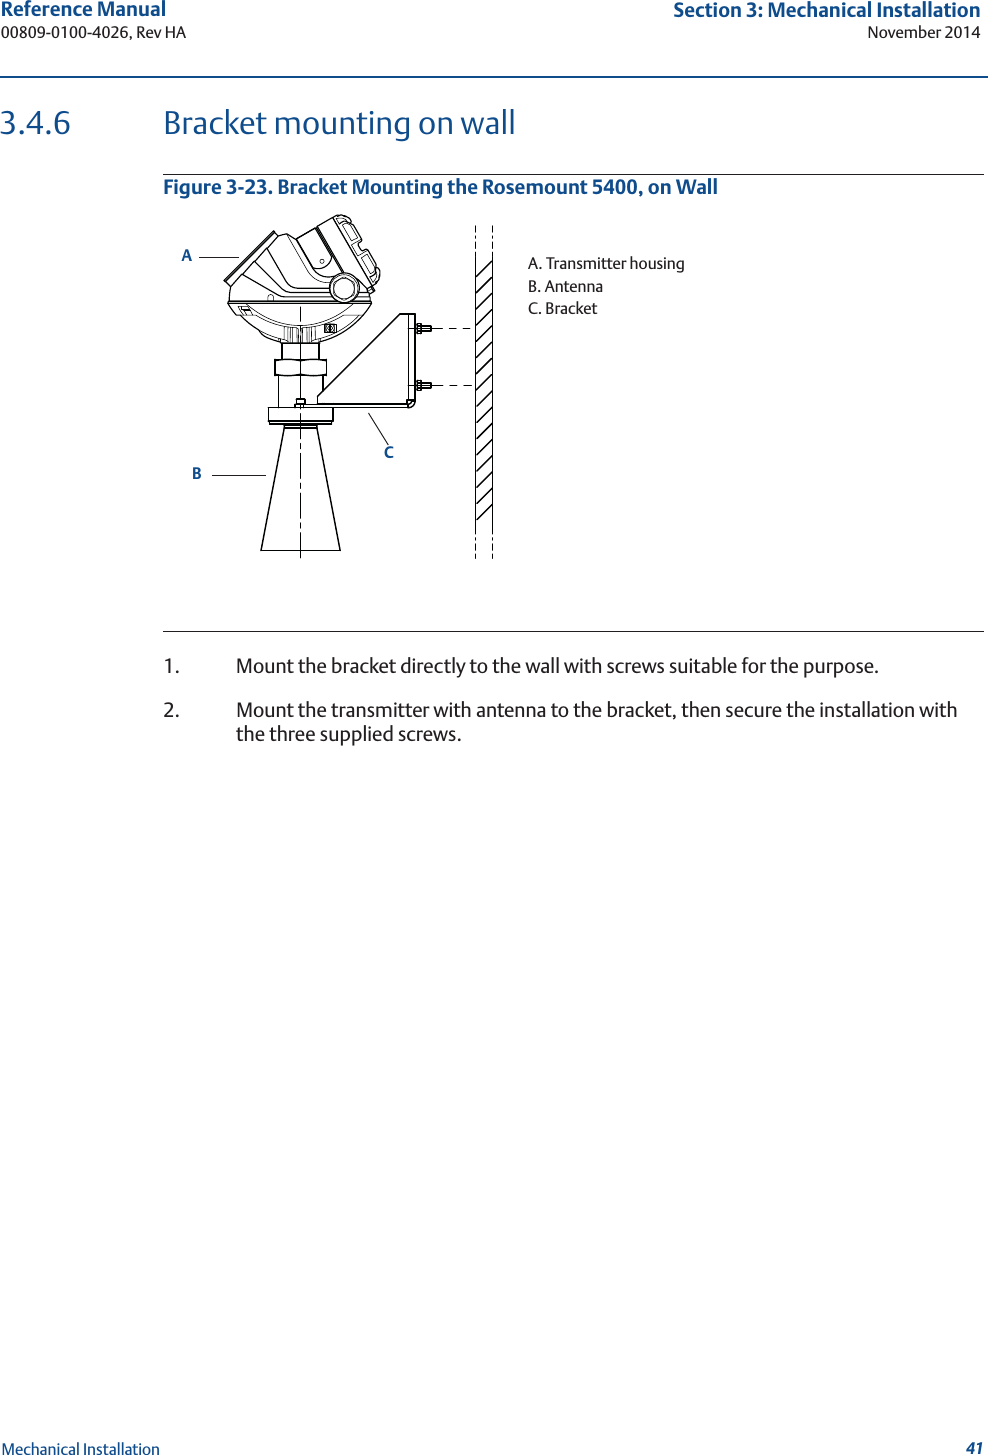 41Reference Manual 00809-0100-4026, Rev HASection 3: Mechanical InstallationNovember 2014Mechanical Installation3.4.6 Bracket mounting on wallFigure 3-23. Bracket Mounting the Rosemount 5400, on Wall1. Mount the bracket directly to the wall with screws suitable for the purpose.2. Mount the transmitter with antenna to the bracket, then secure the installation with the three supplied screws.ACBA. Transmitter housingB. AntennaC. Bracket